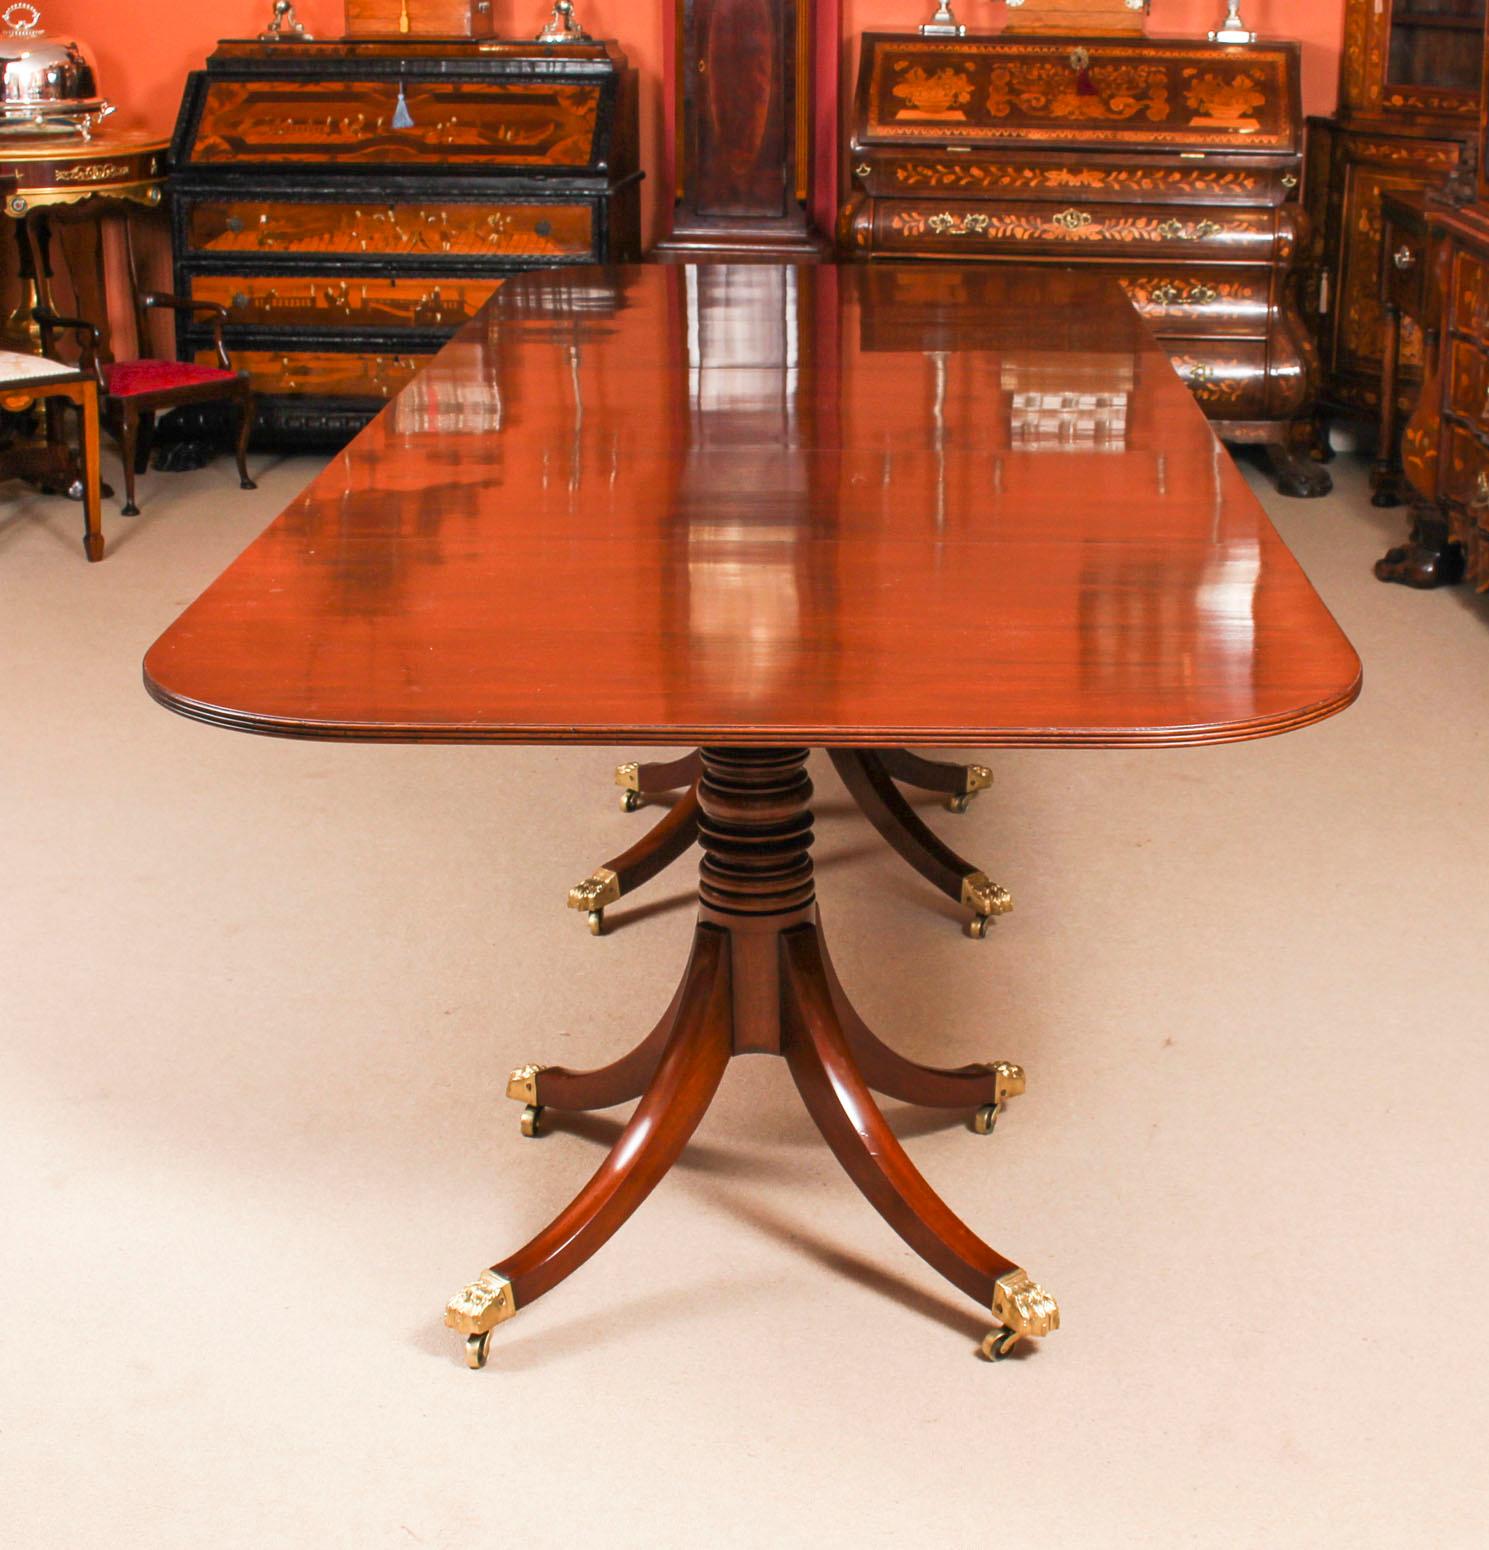 This is an elegant antique George III Regency Period dining table, circa 1820 in date.

The table is raised on three bases each with turned pillars, sabre legs terminating in brass claw caps and castors. It has two leaves which can be added or